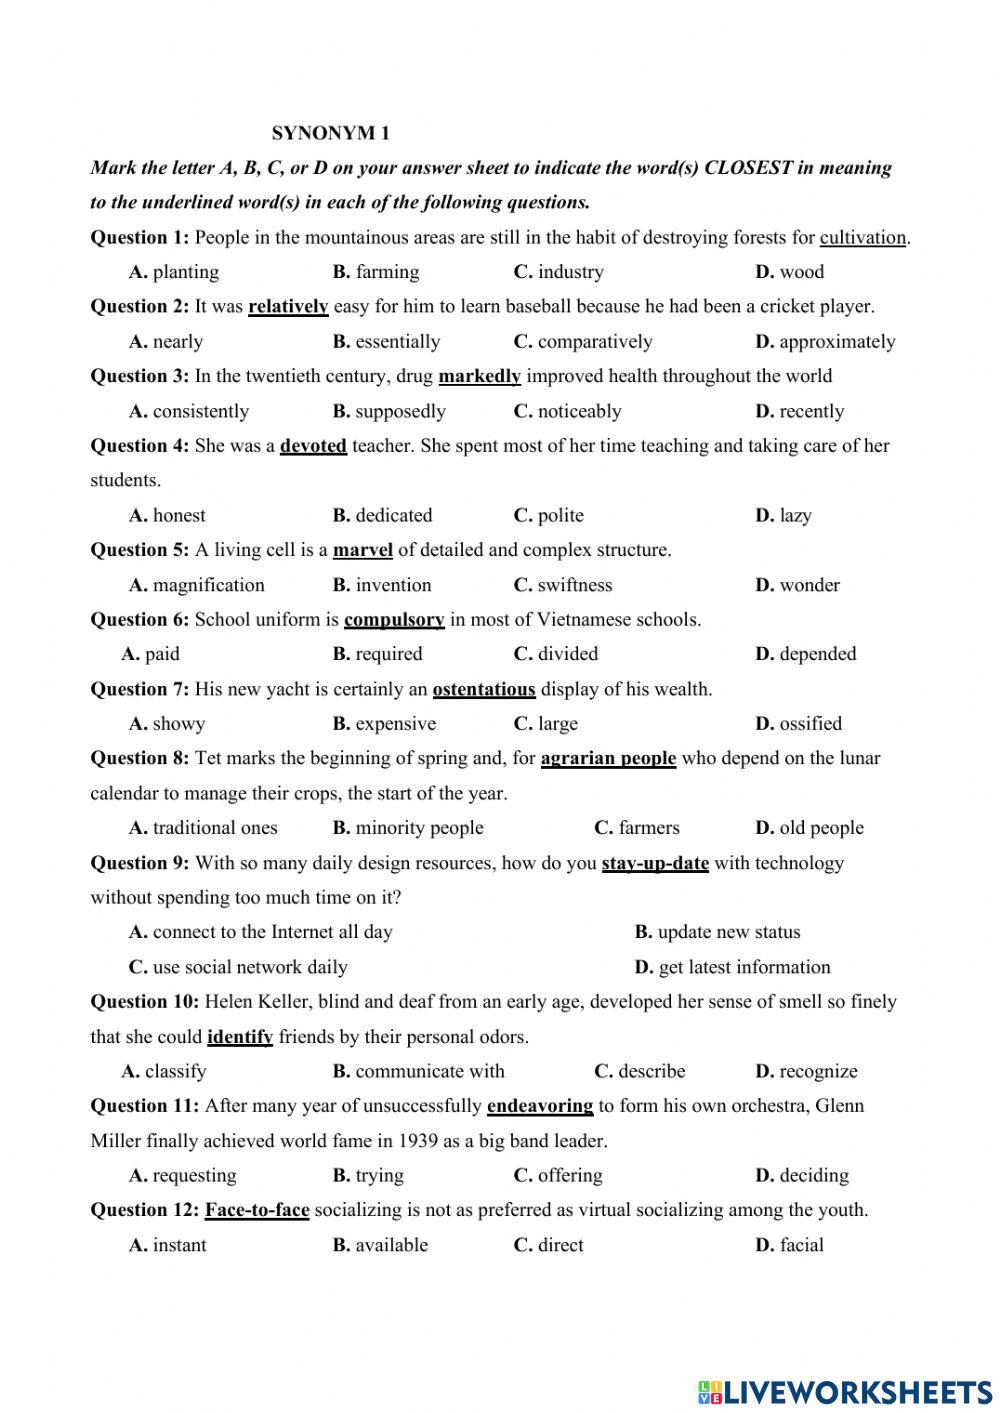 SYNONYM 1 online exercise for | Live Worksheets